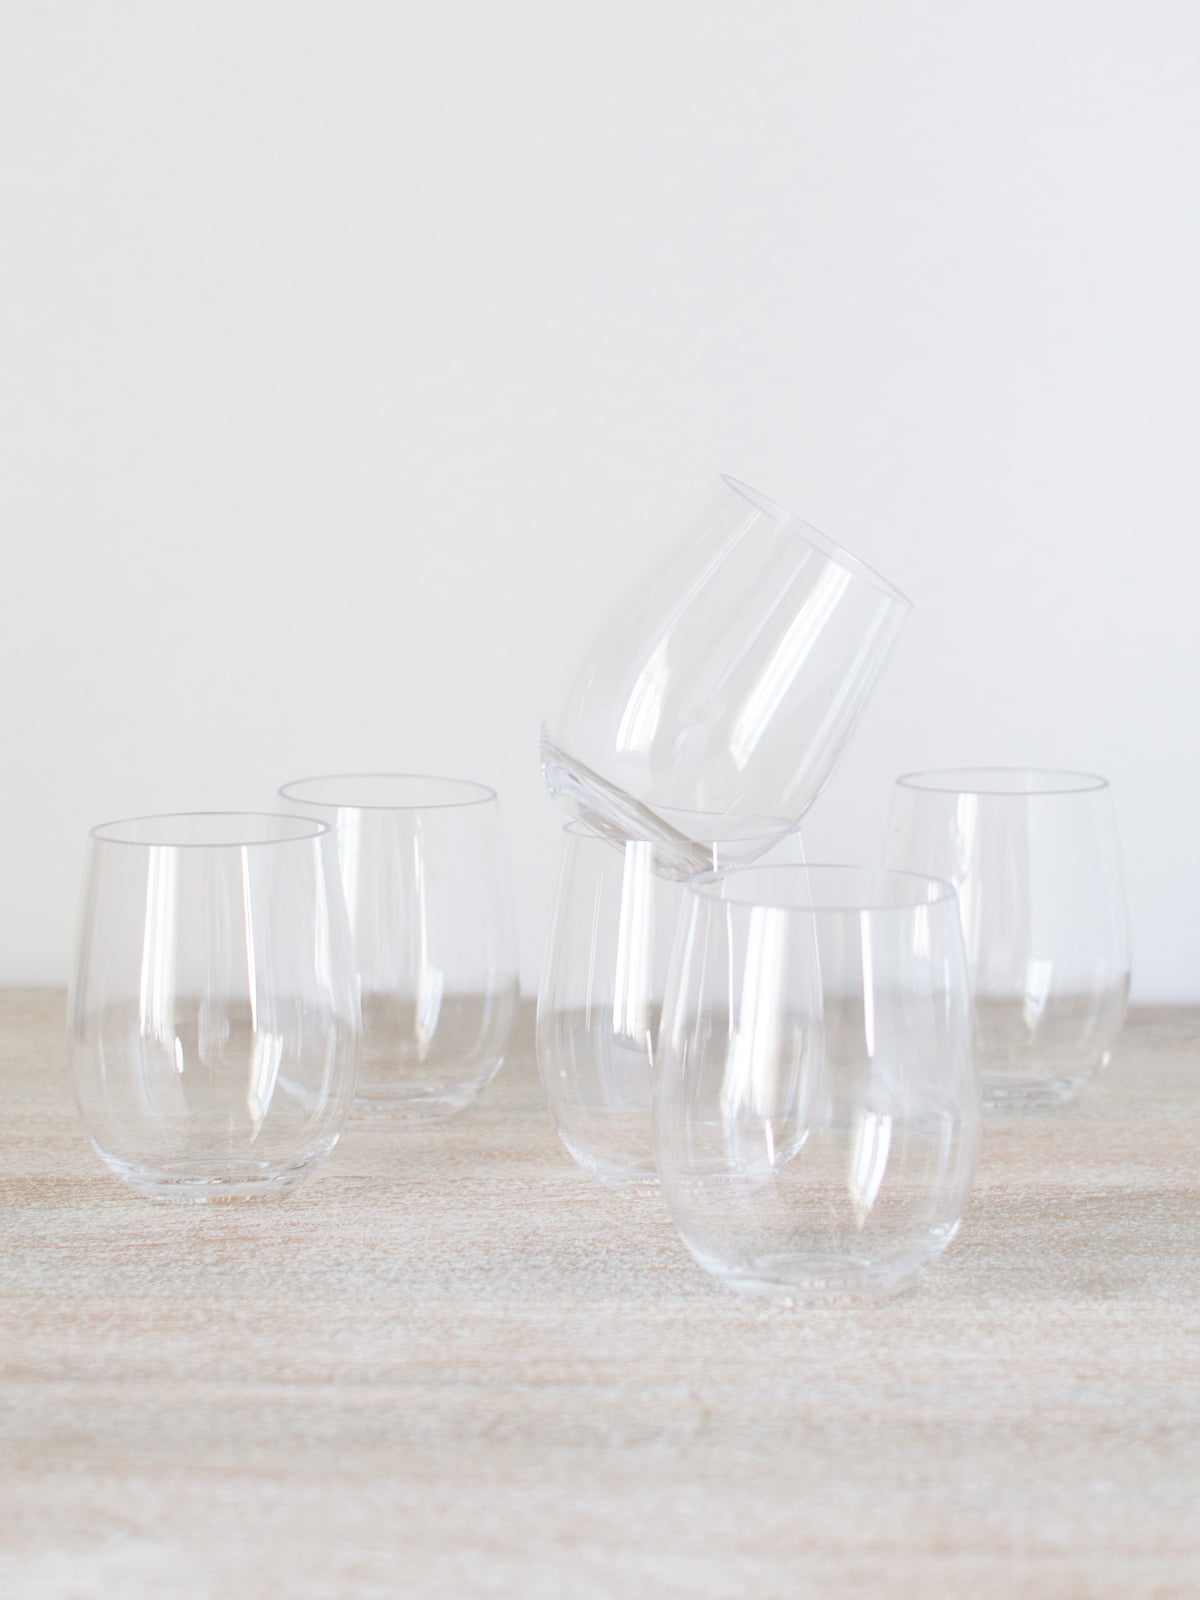 Stemless Acrylic Glasses, Set of 6